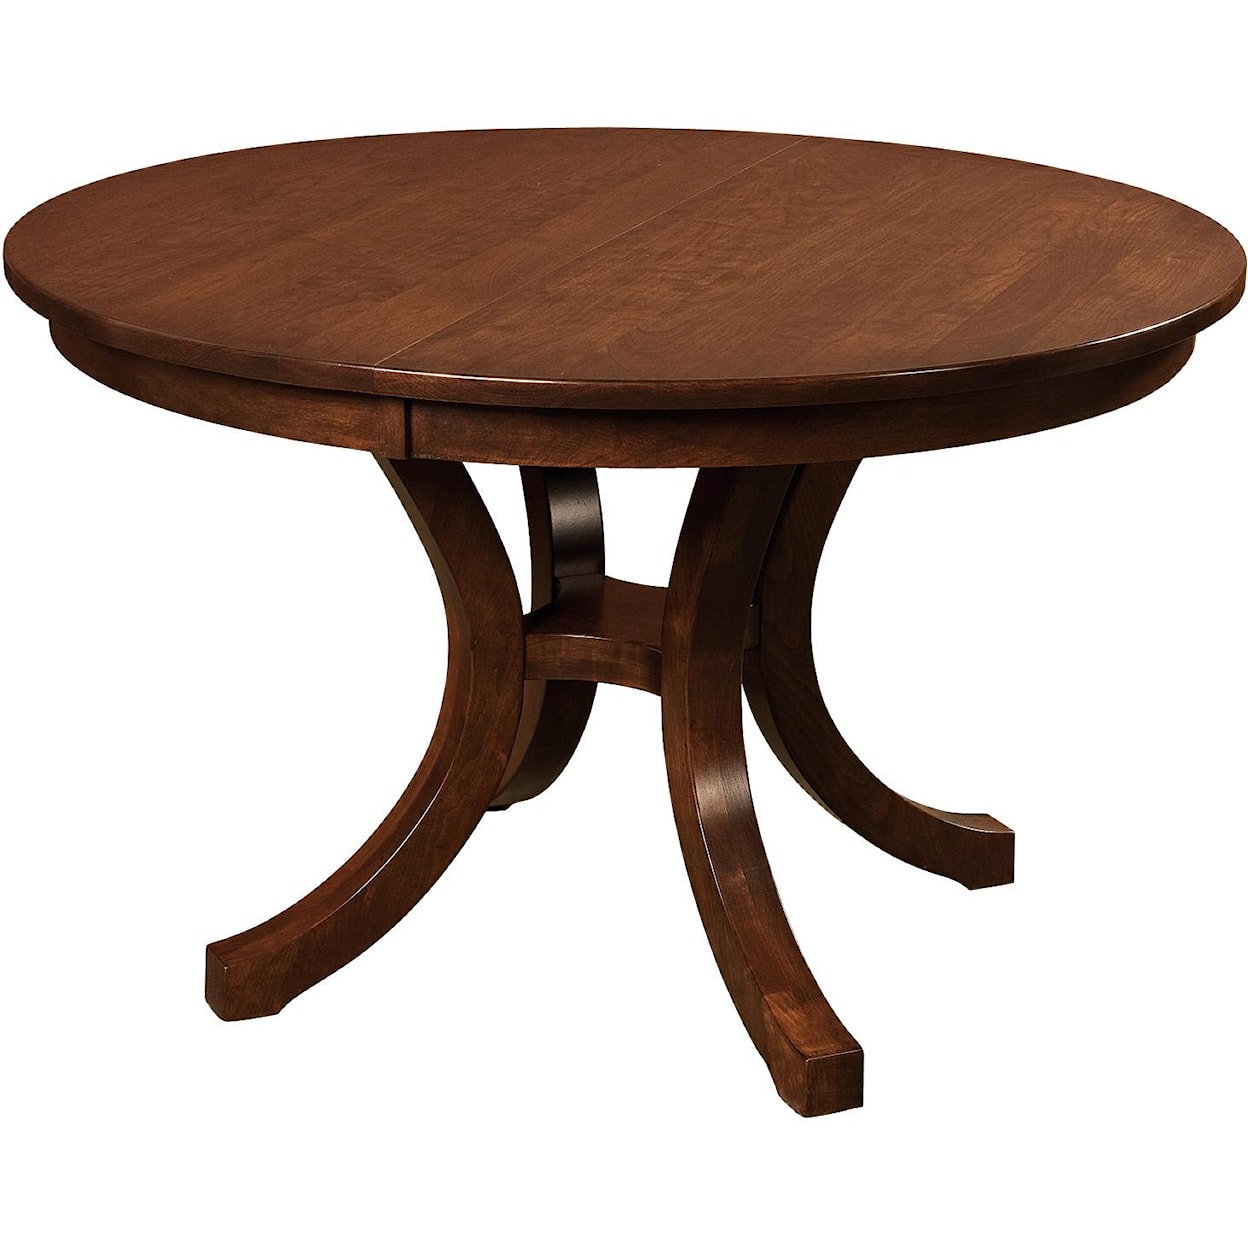 Amish Impressions by Fusion Designs Charleston 60" Round Single Pedestal Table